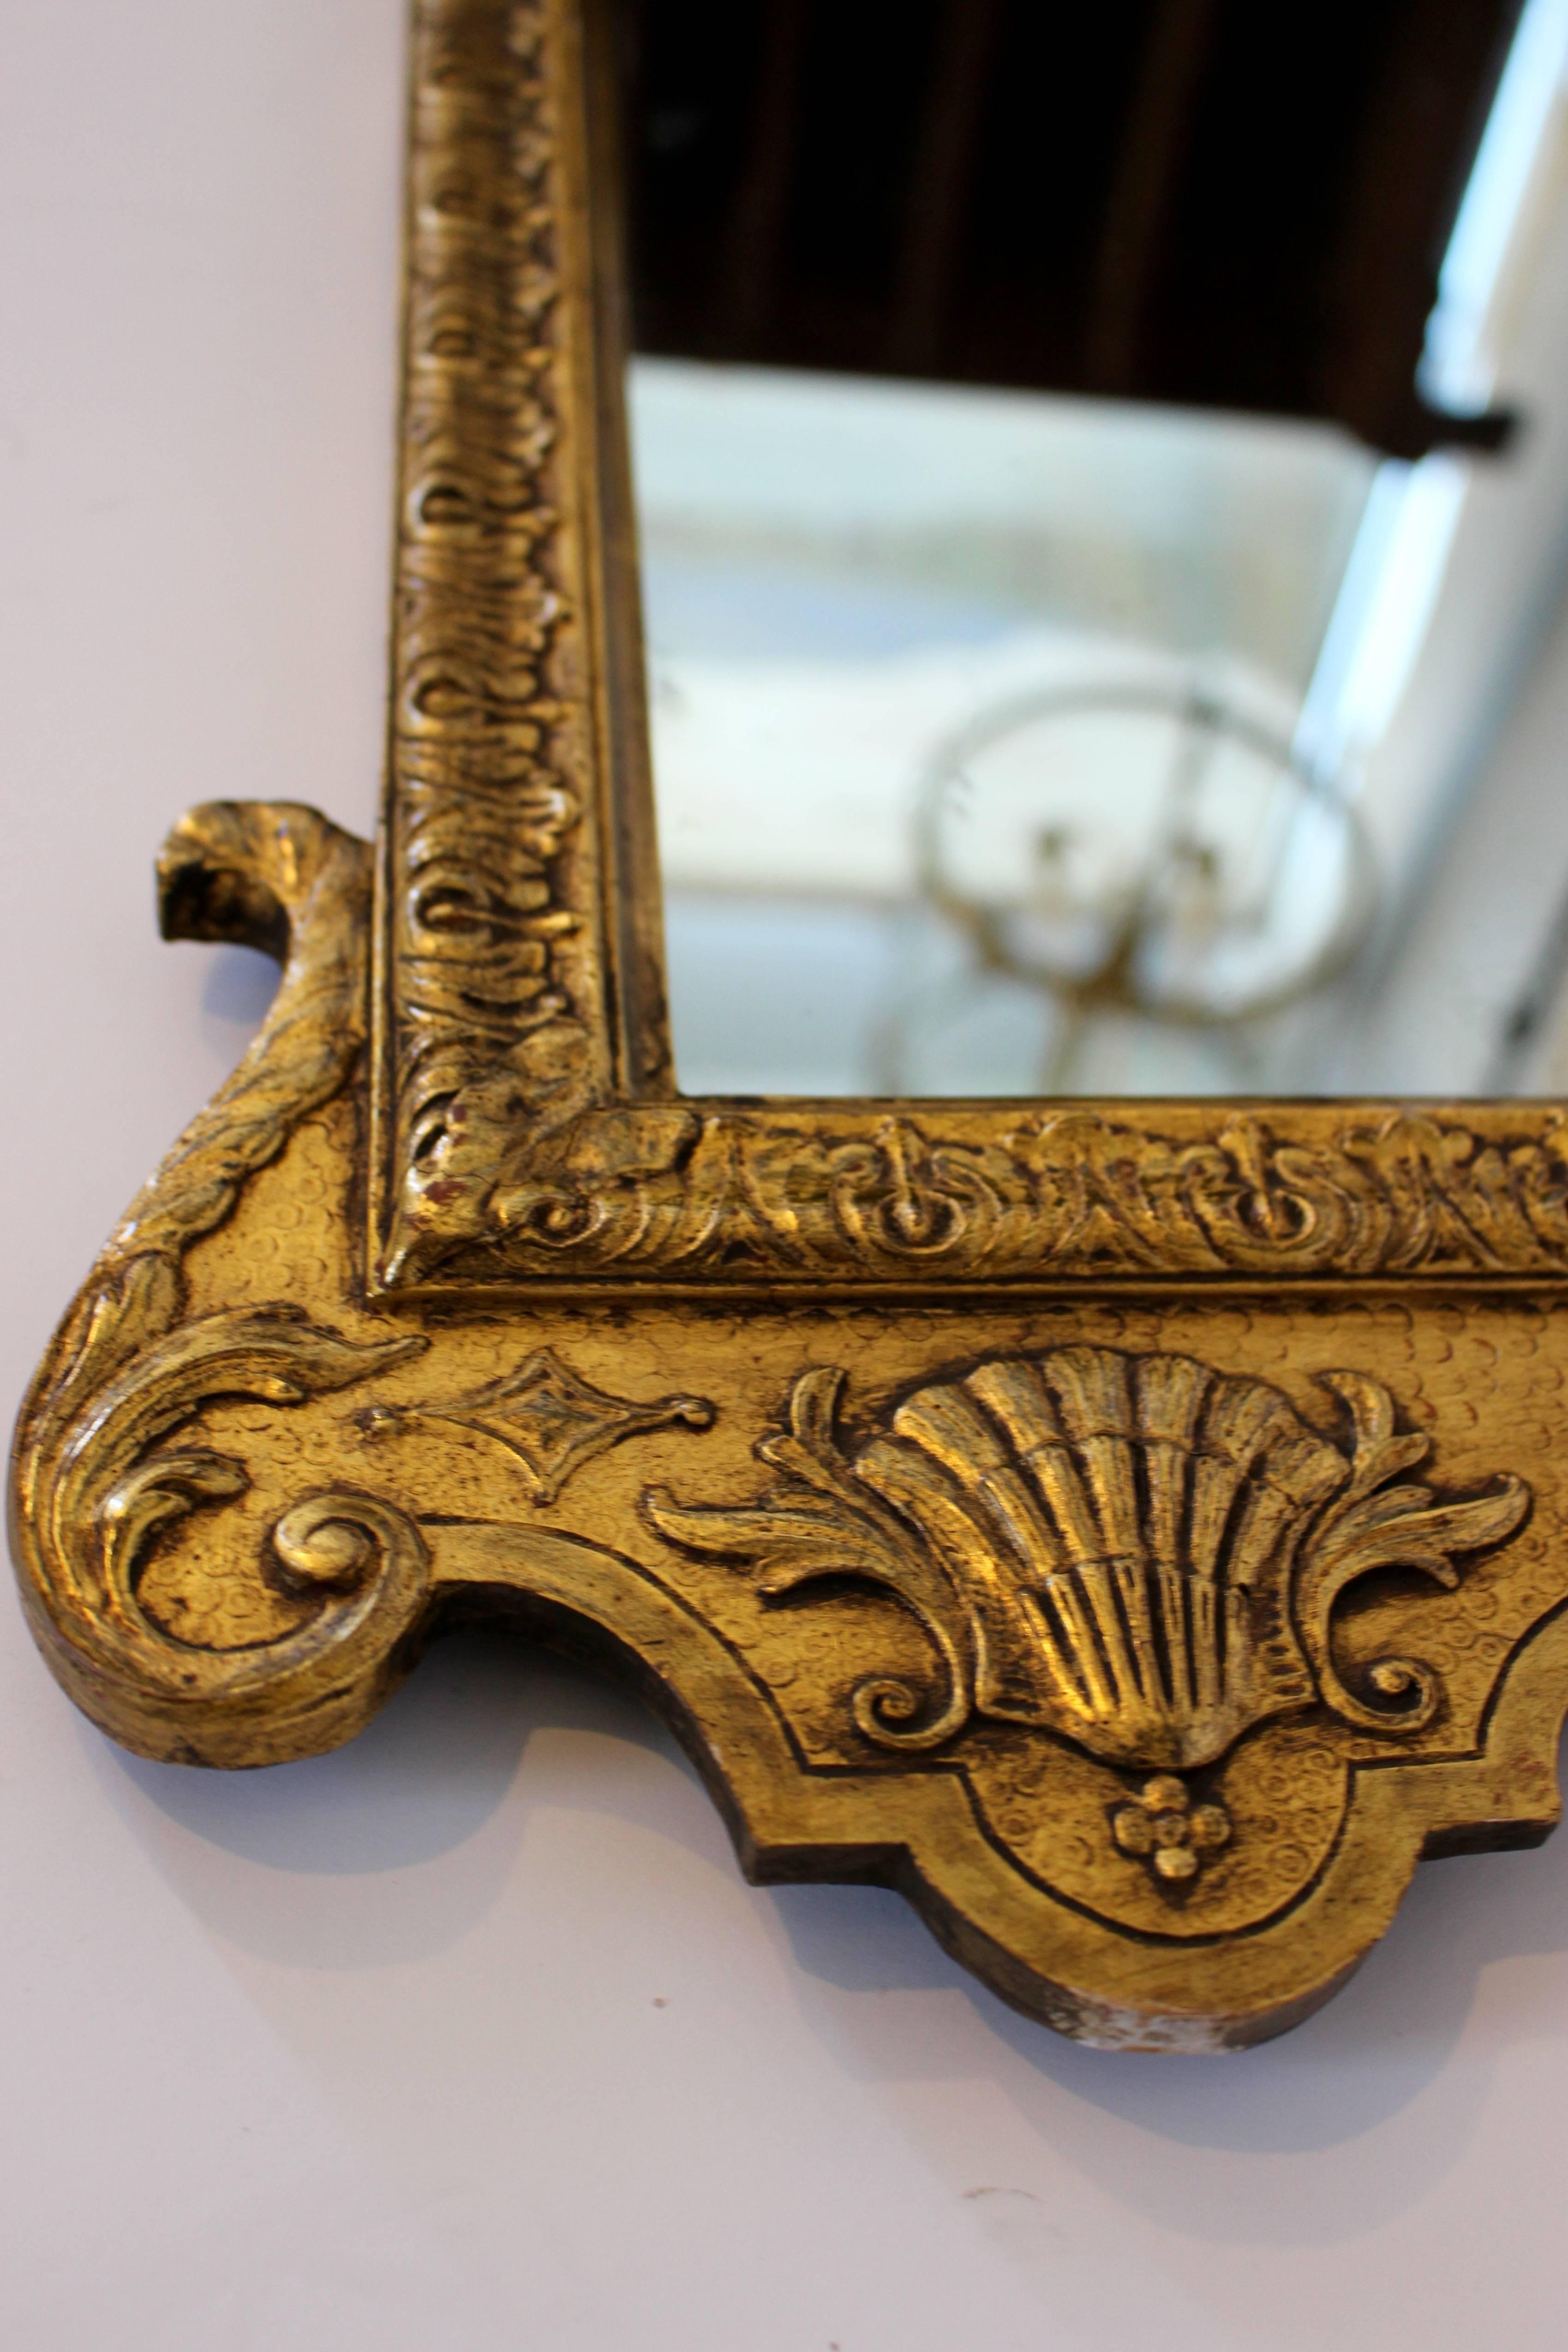 An early 18th century George I giltwood pier mirror with carved decoration and broken pediment. The original beveled rectangular mirror plate with rounded top corners is set within a giltwood frame carved with a palmette frieze surmounted by a